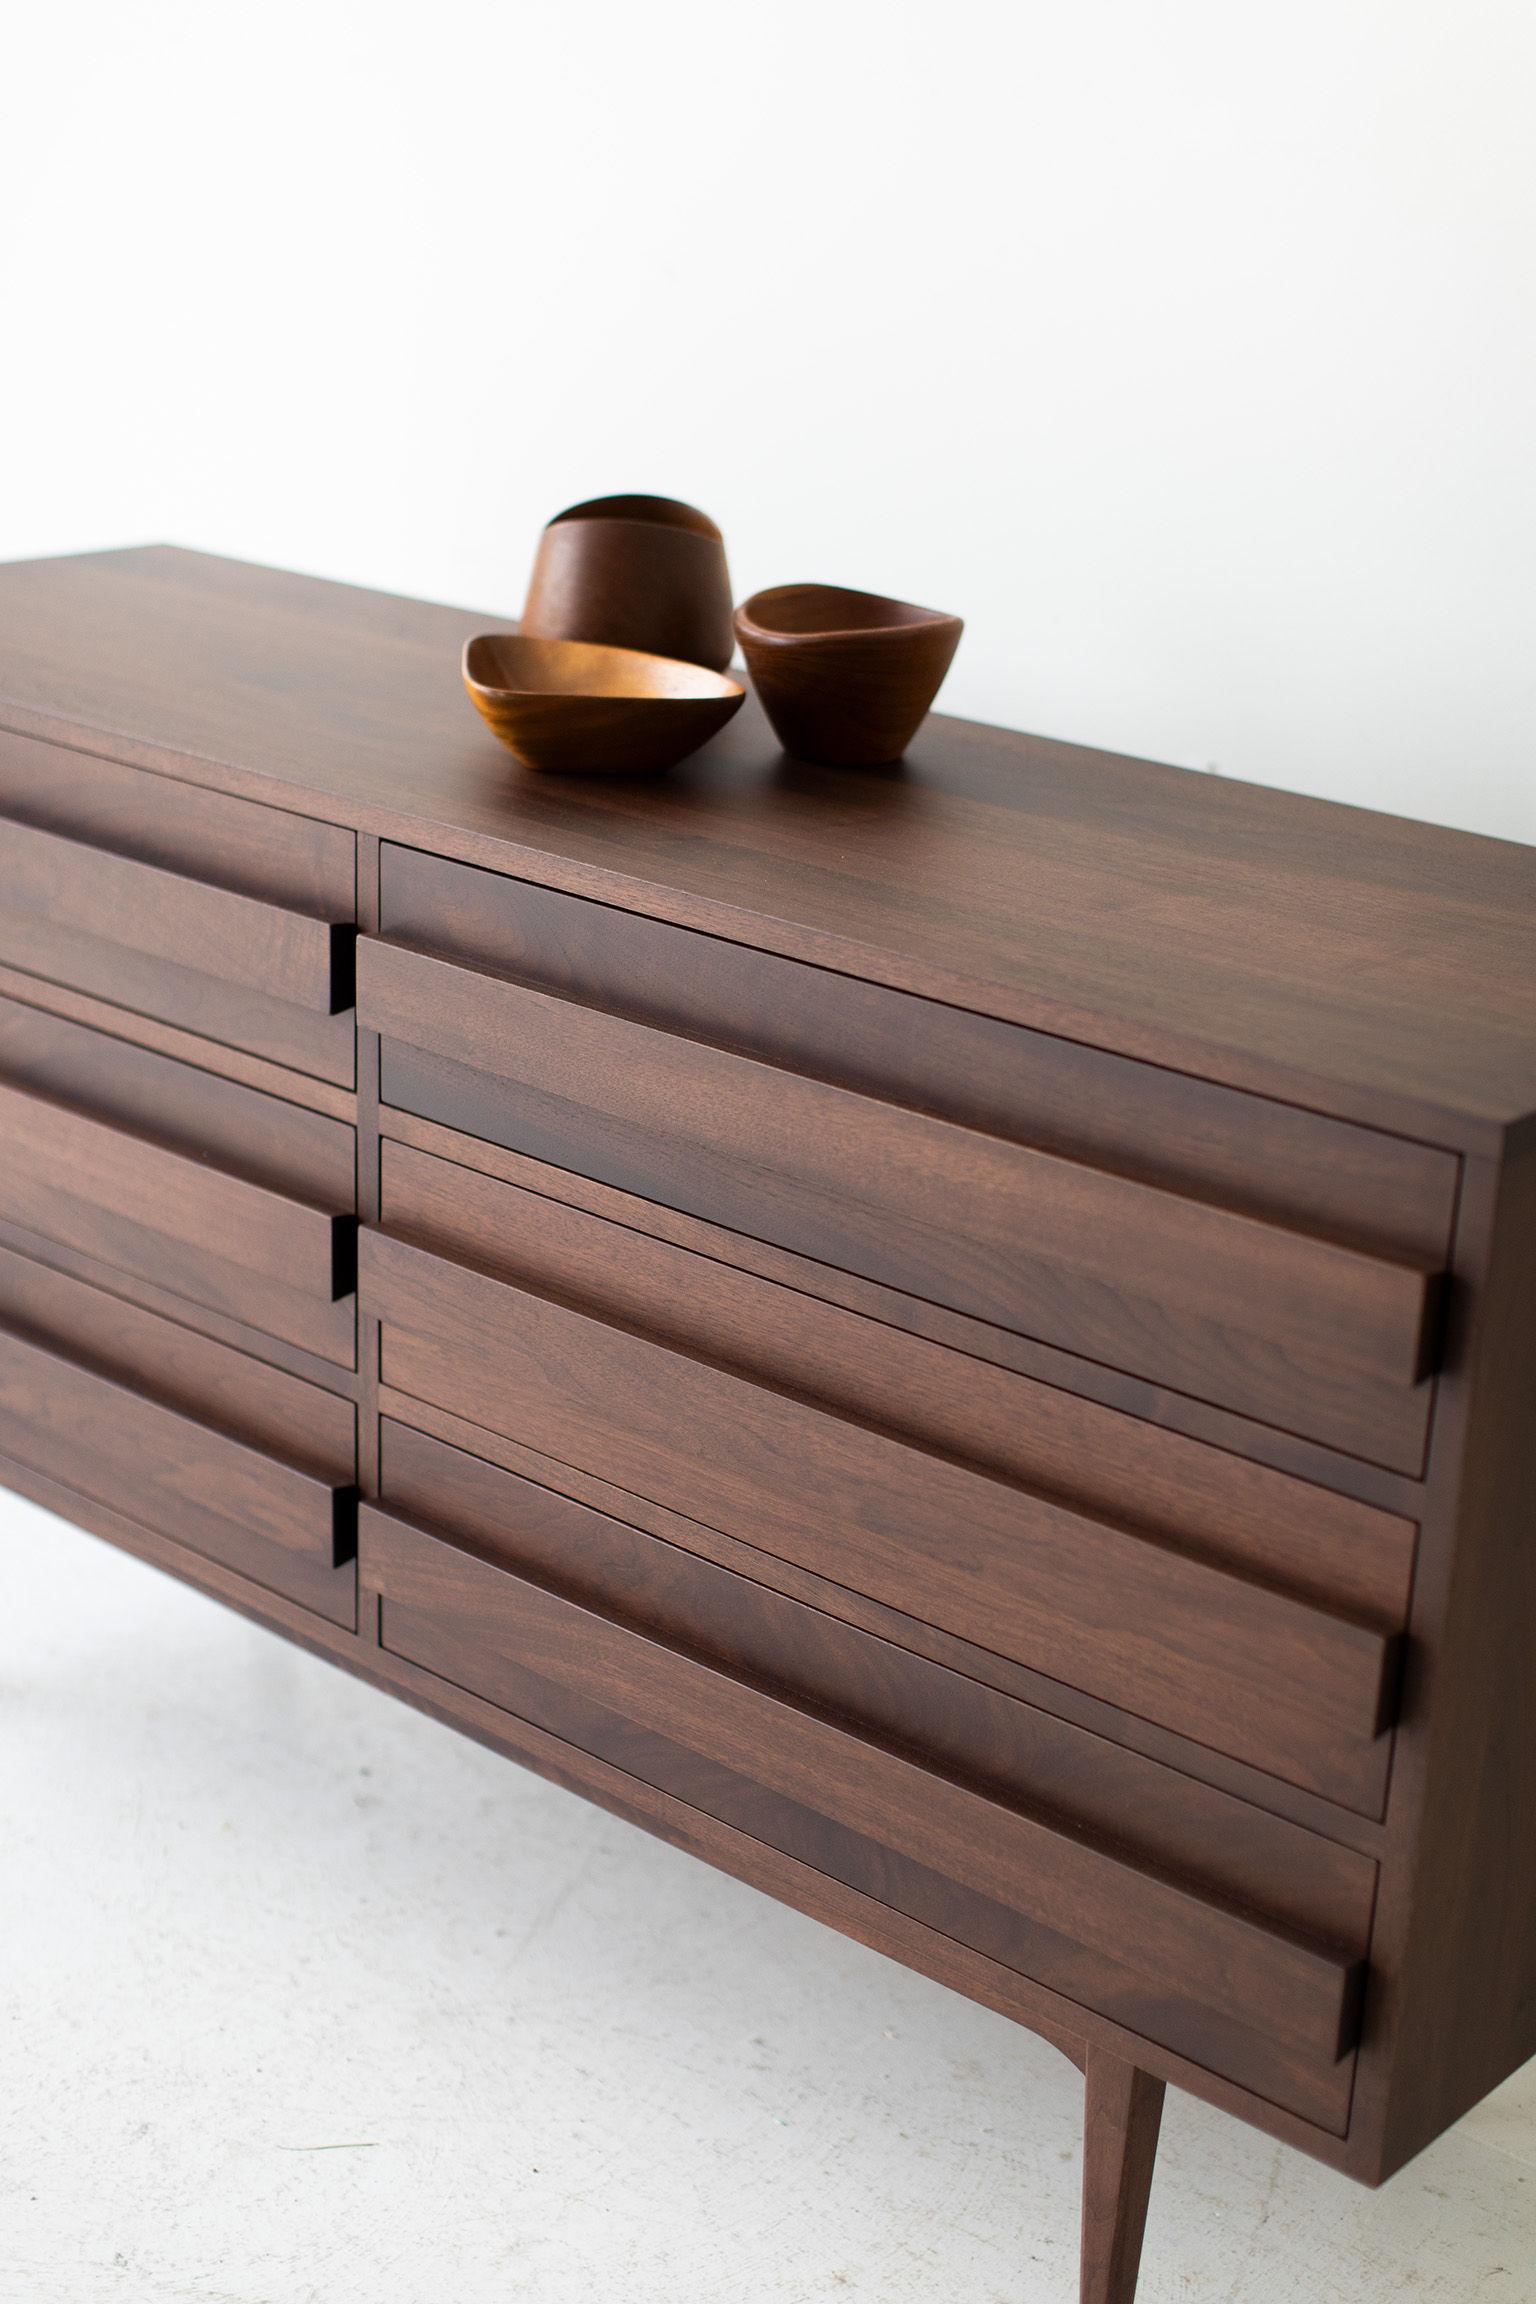 This modern dresser is made in the heart of Ohio with locally sourced wood. Each dresser is hand-made with solid walnut and finished with a beautiful matte commercial grade finish. It is important to us to let the natural beauty of the walnut shine.